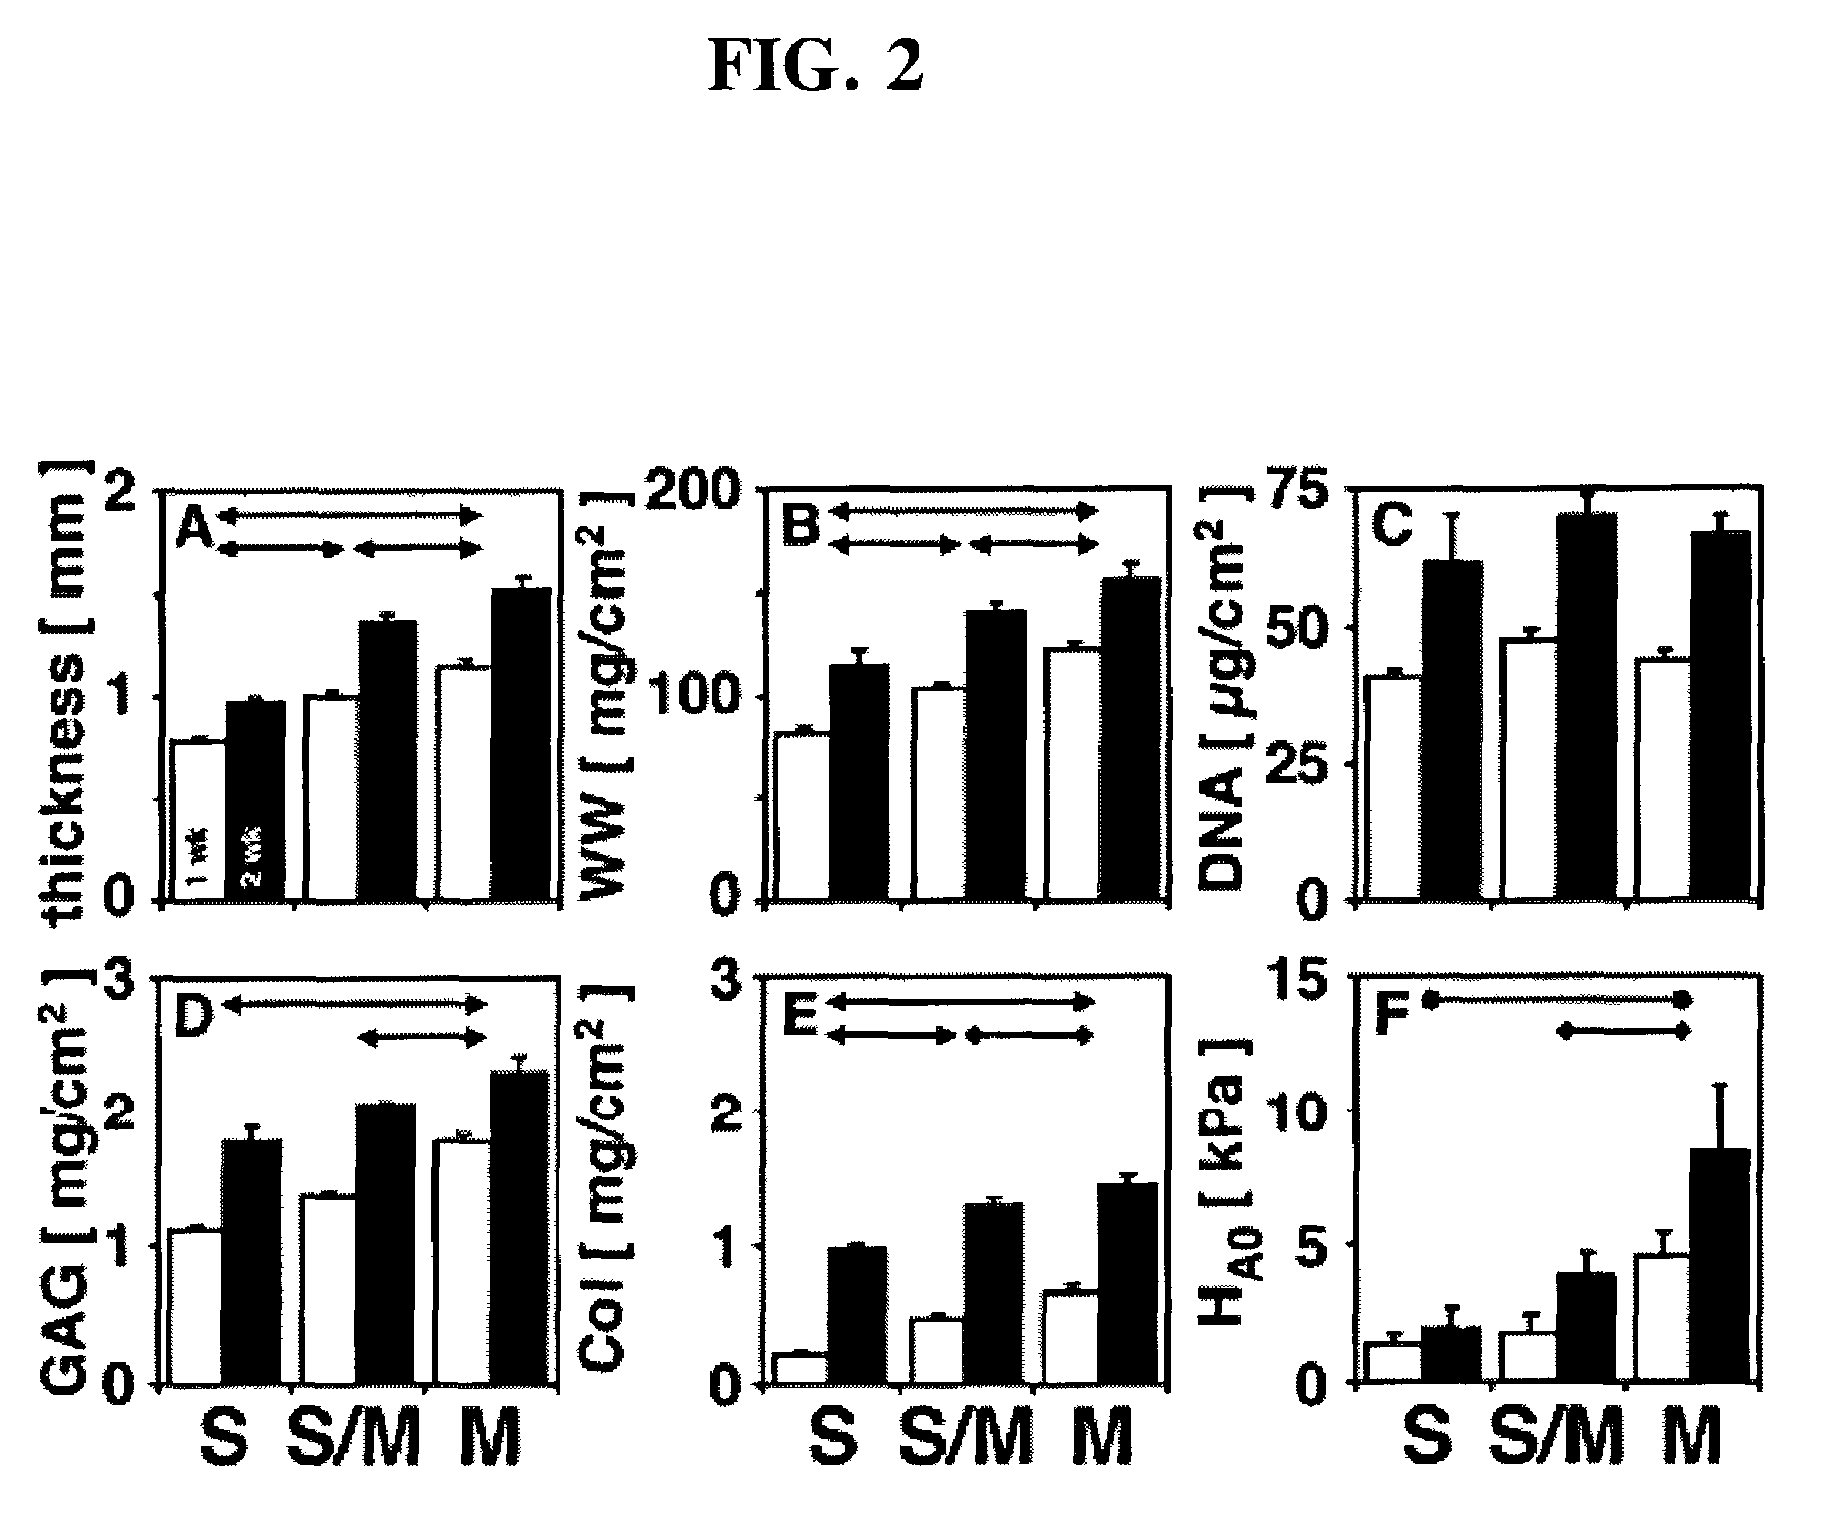 Methods to engineer stratified cartilage tissue